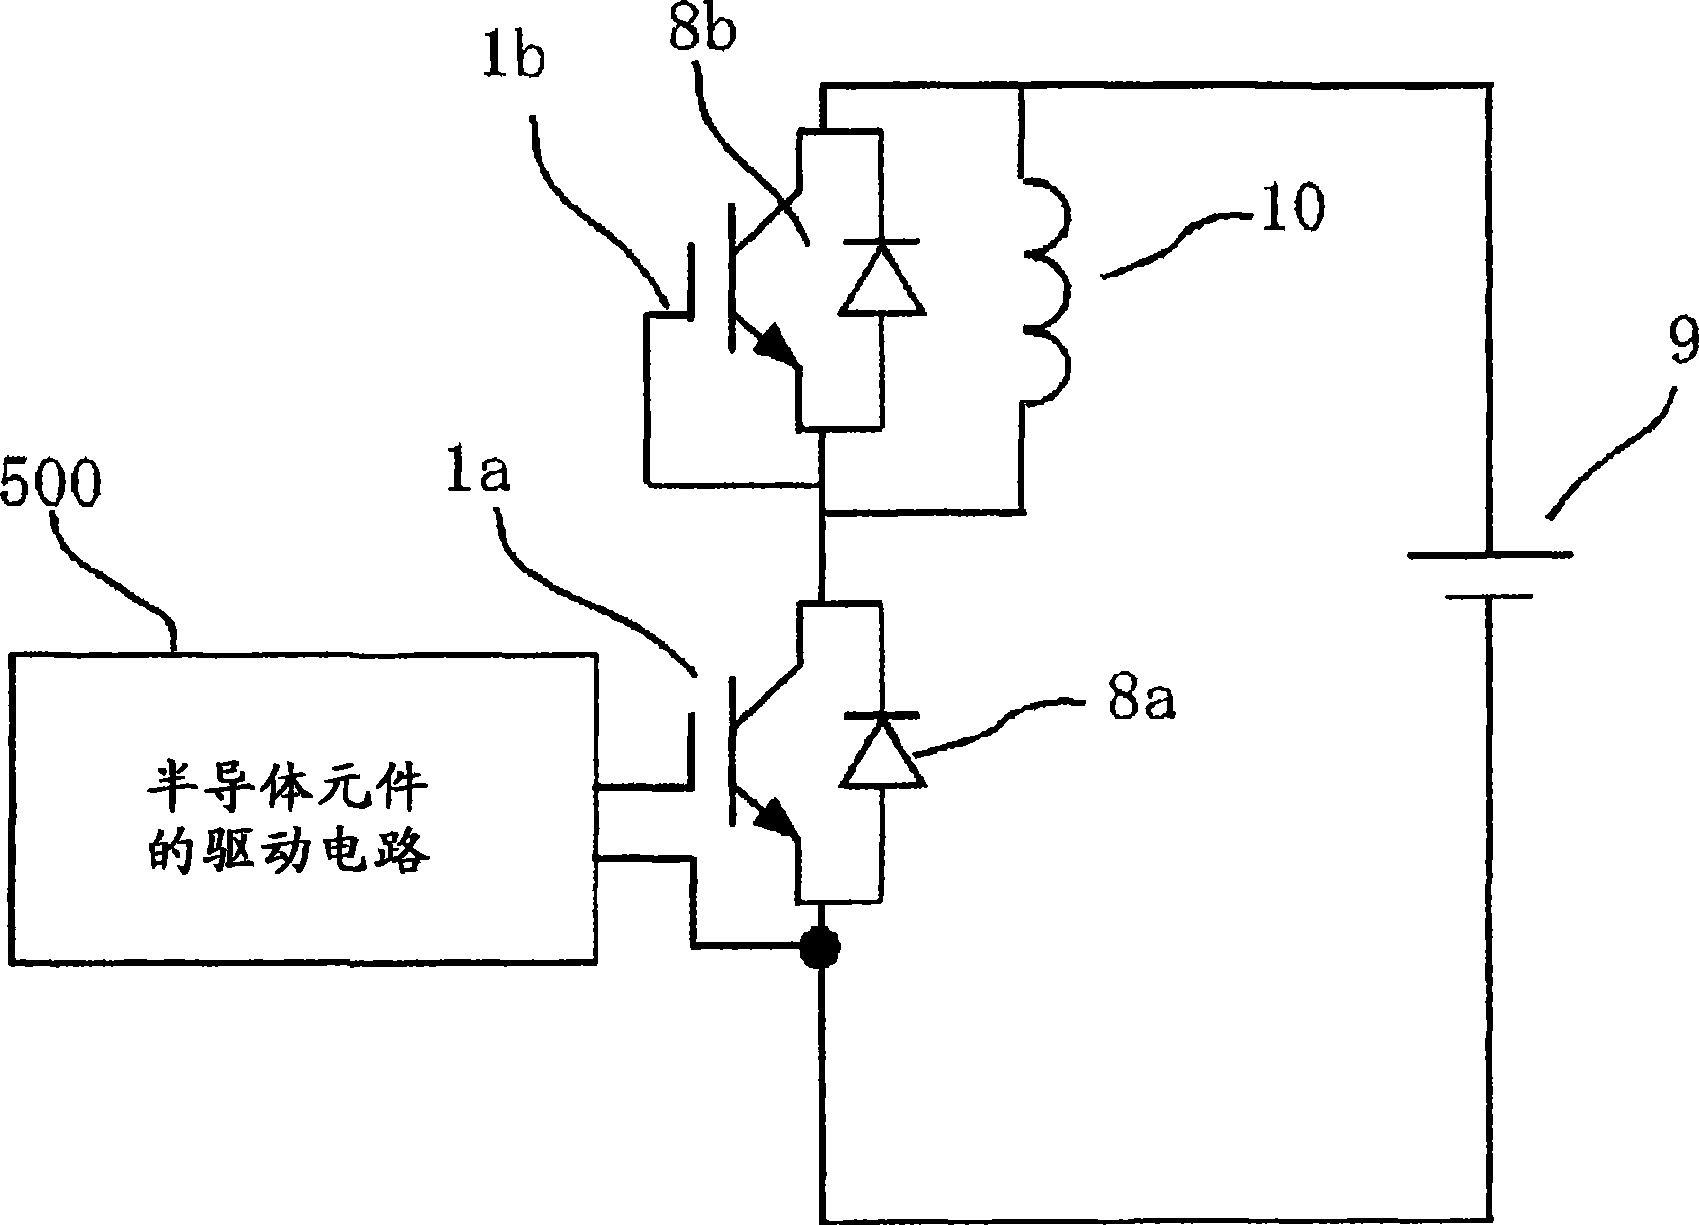 Driving circuit for semiconductor element